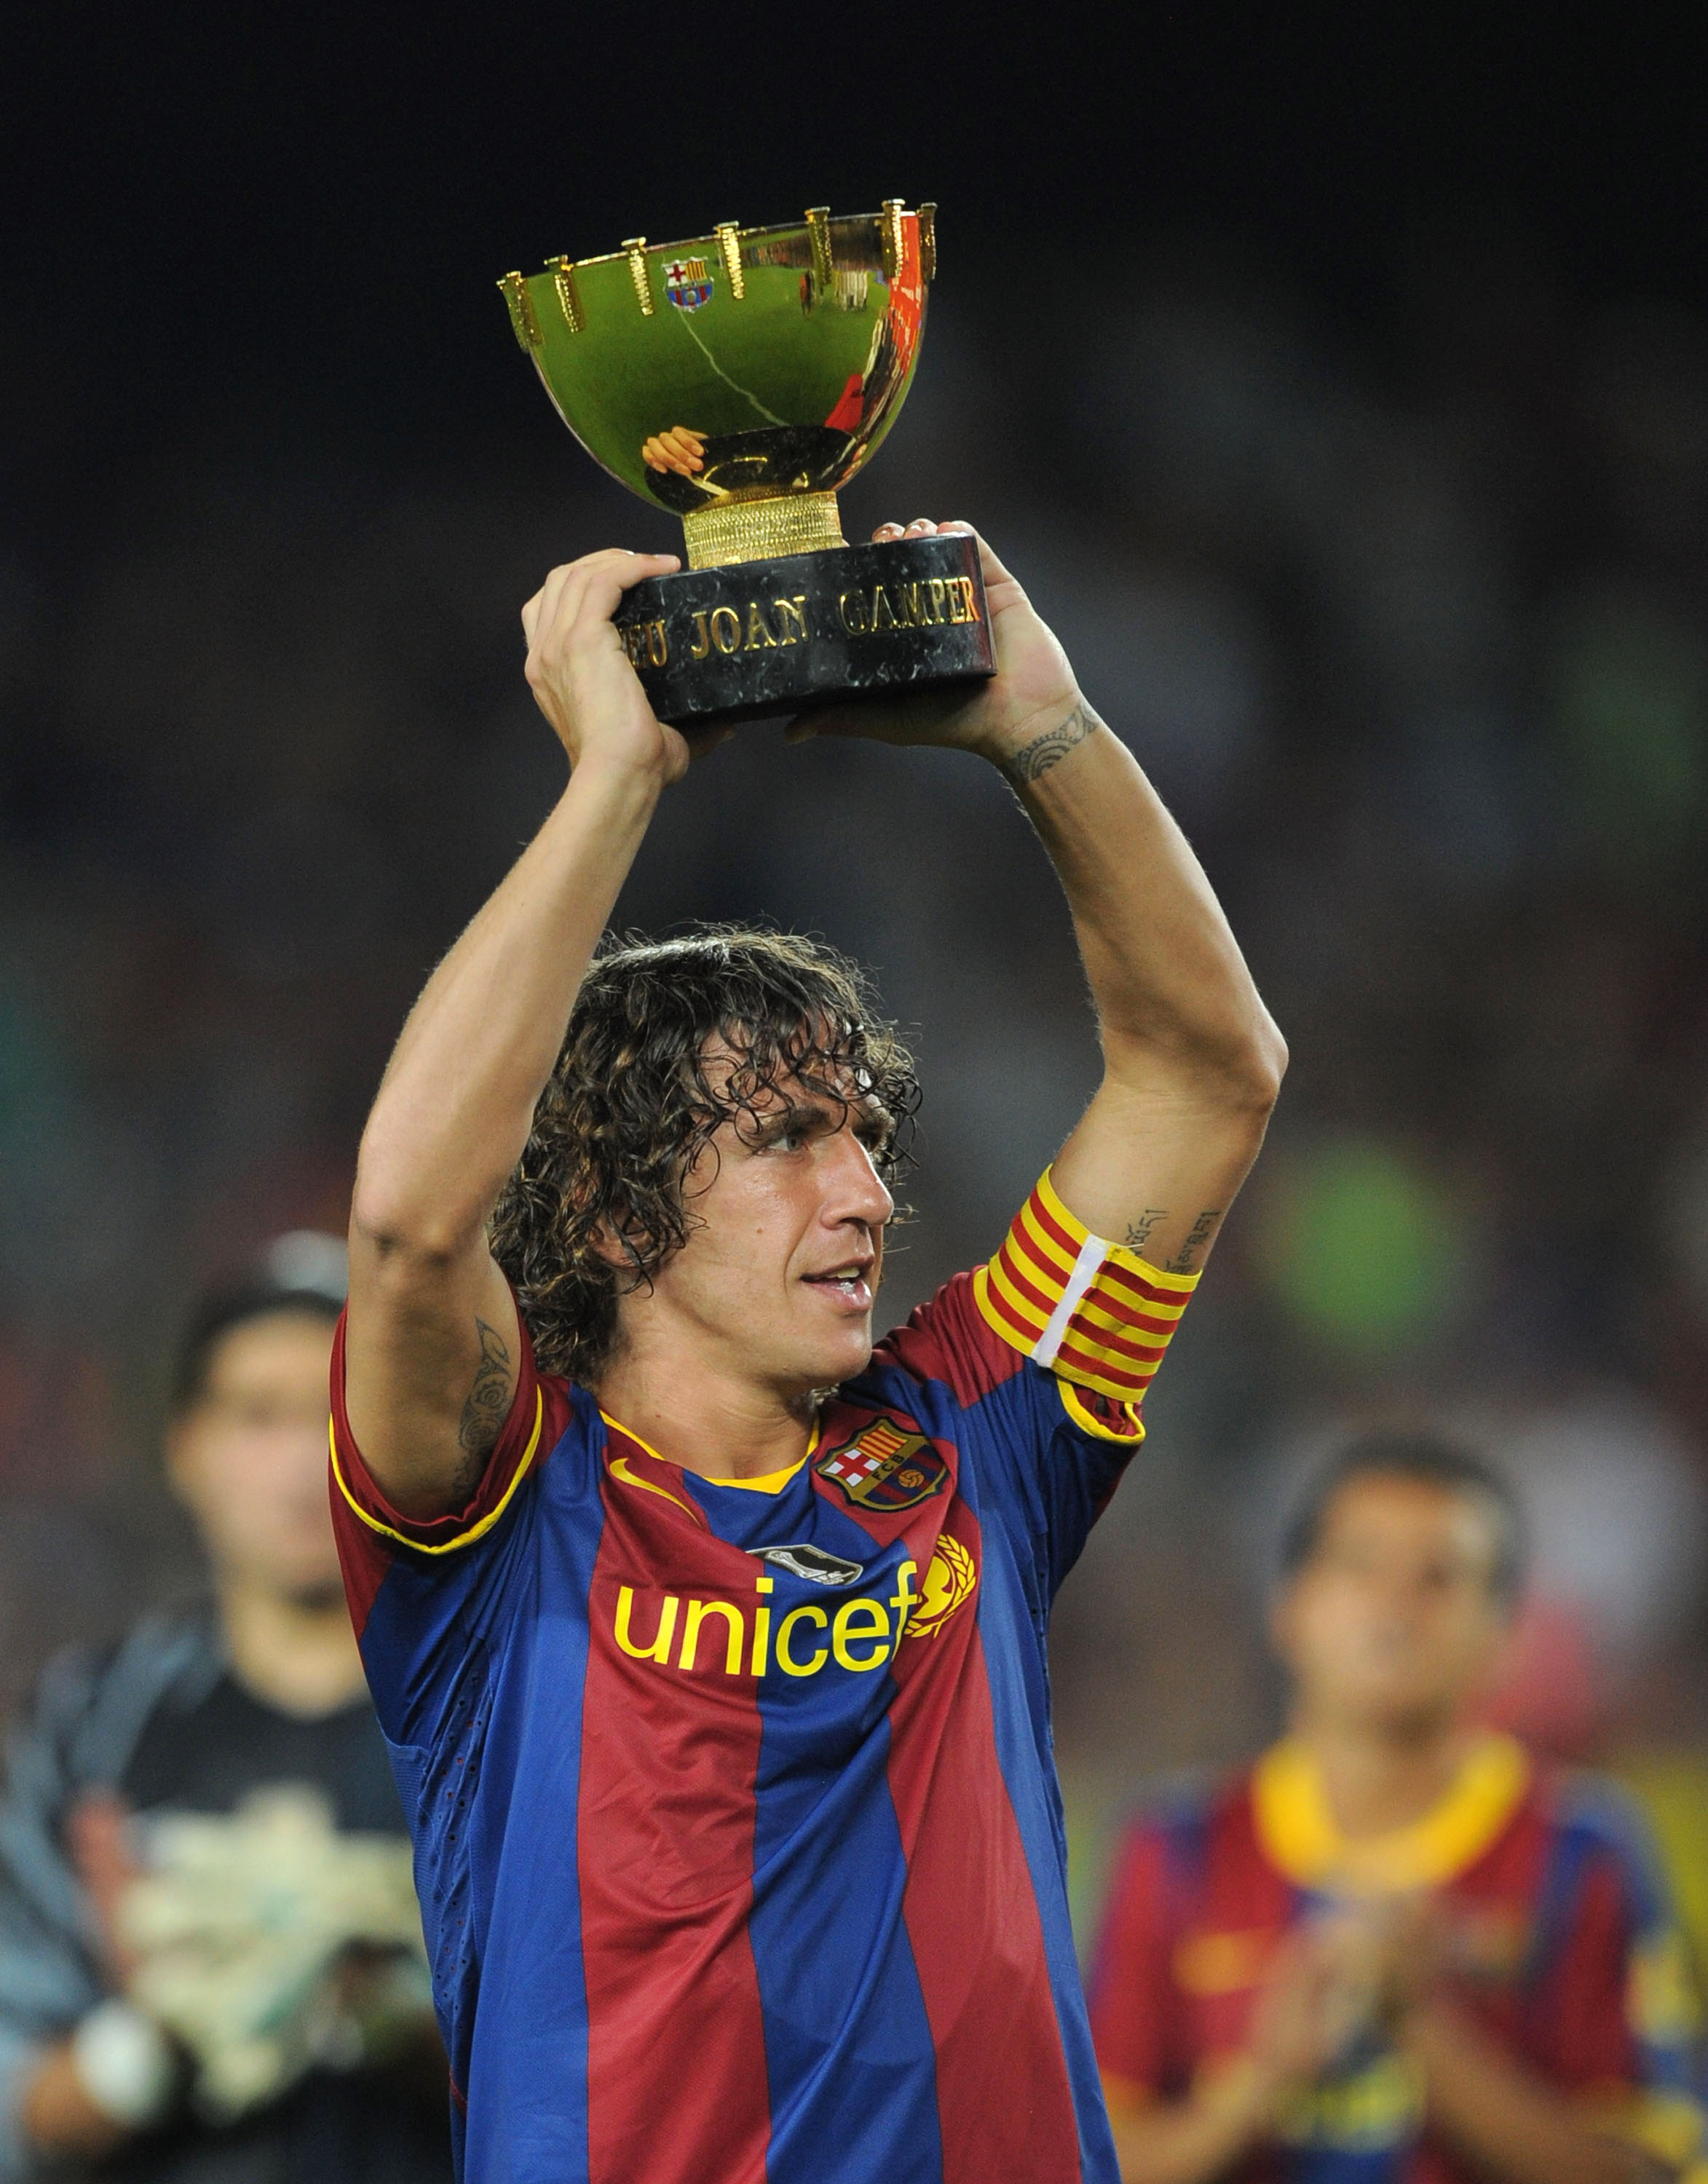 BARCELONA, SPAIN - AUGUST 25:  Carles Puyol of Barcelona holds the Joan Gamper Trophy after his team beat AC Milan in the Joan Gamper Trophy match between Barcelona and AC Milan at Camp Nou stadium on August 25, 2010 in Barcelona, Spain.  (Photo by Denis 